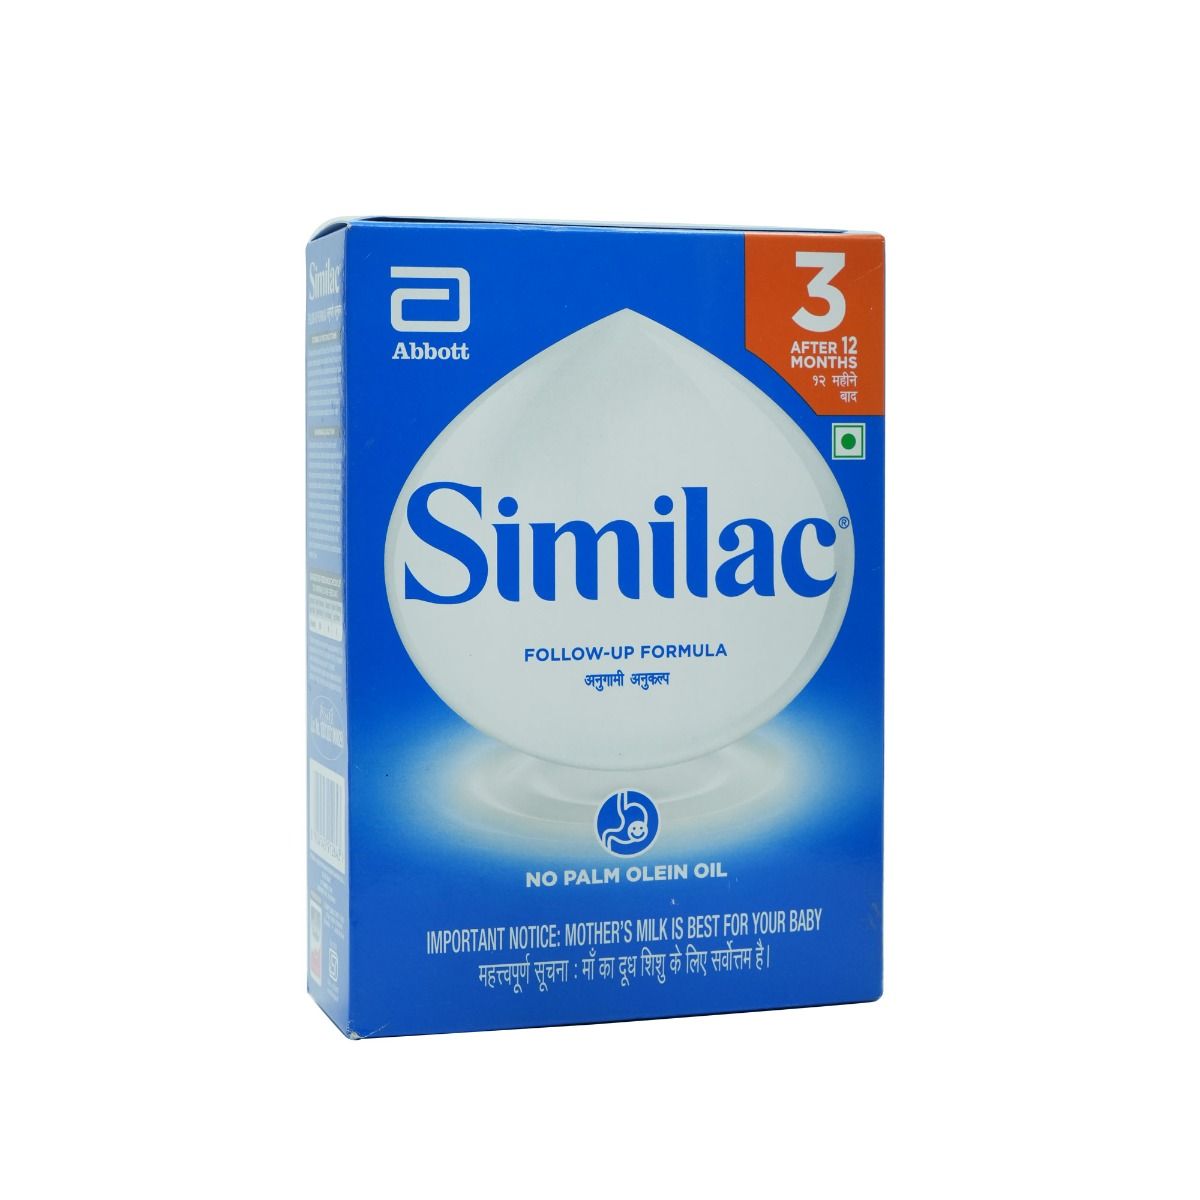 Similac Follow-Up Formula, Stage 3, 12 to 24 Months, 400 gm Refill Pack, Pack of 1 